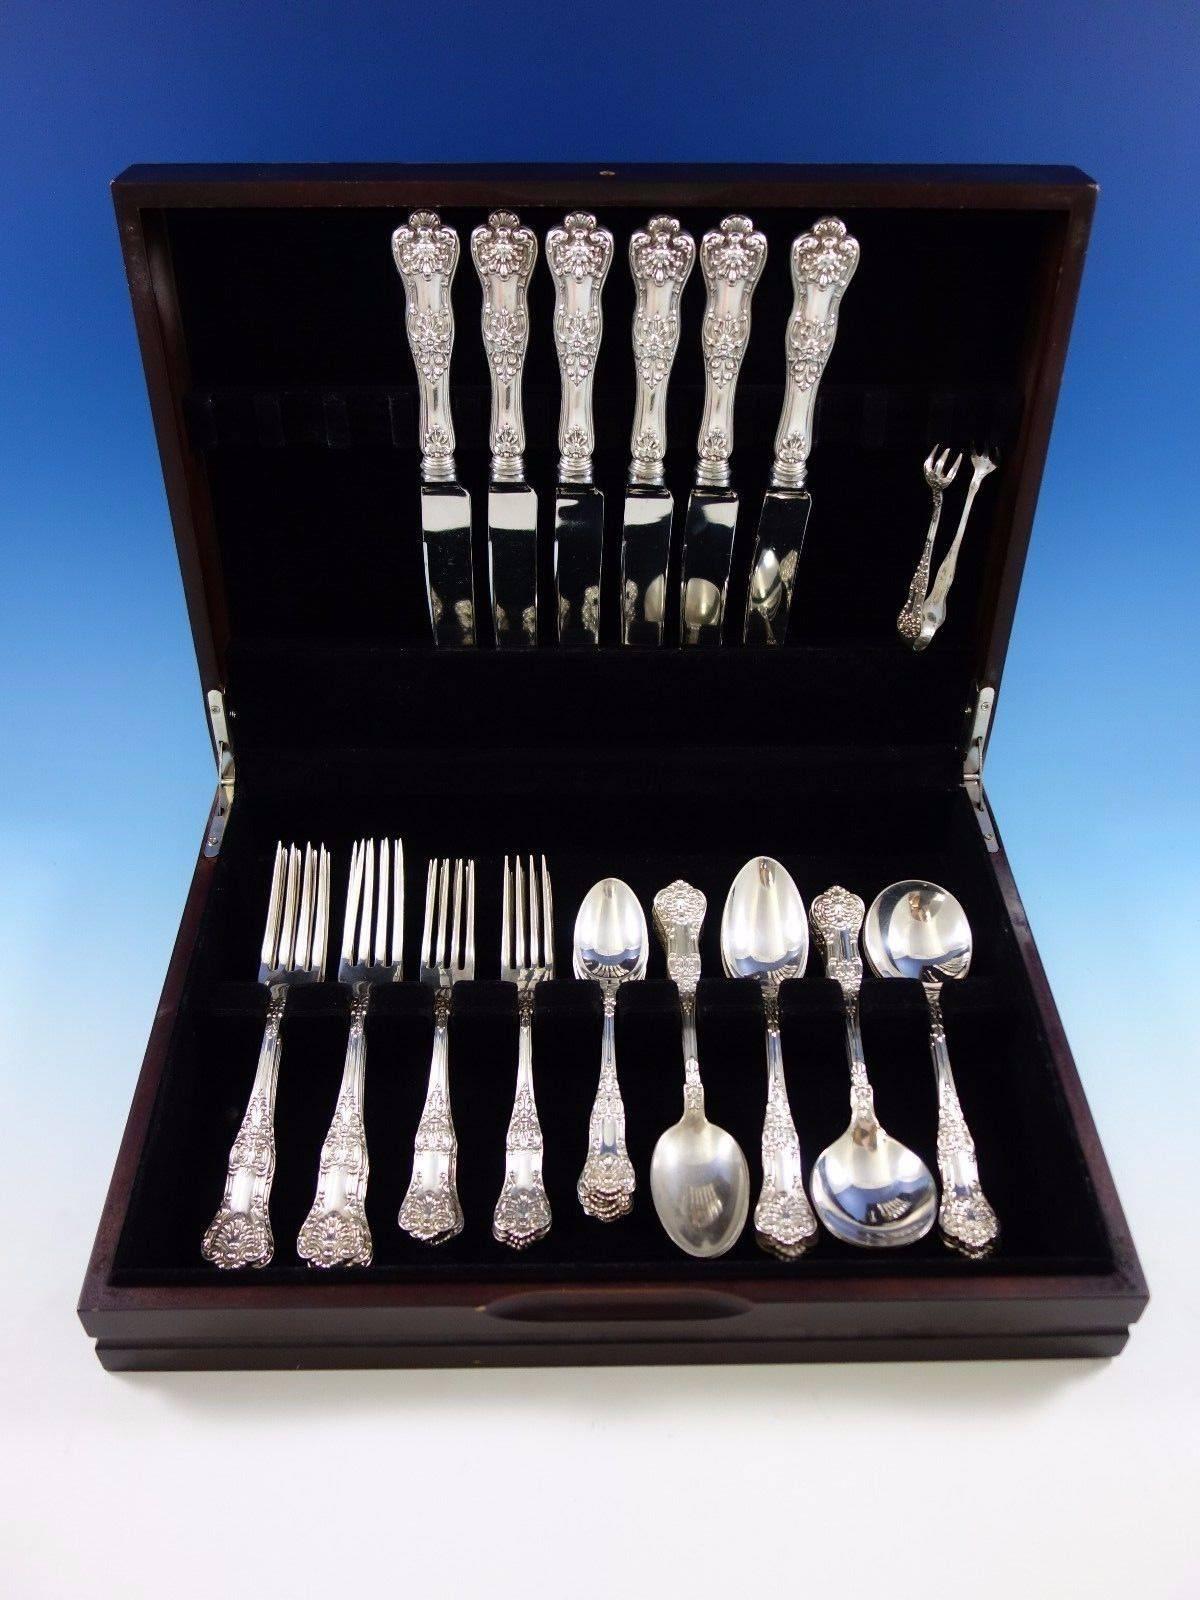 Queens by Birks (Canadian) sterling silver flatware set of 37 pieces. This set includes: 

Six dinner Knives, 10